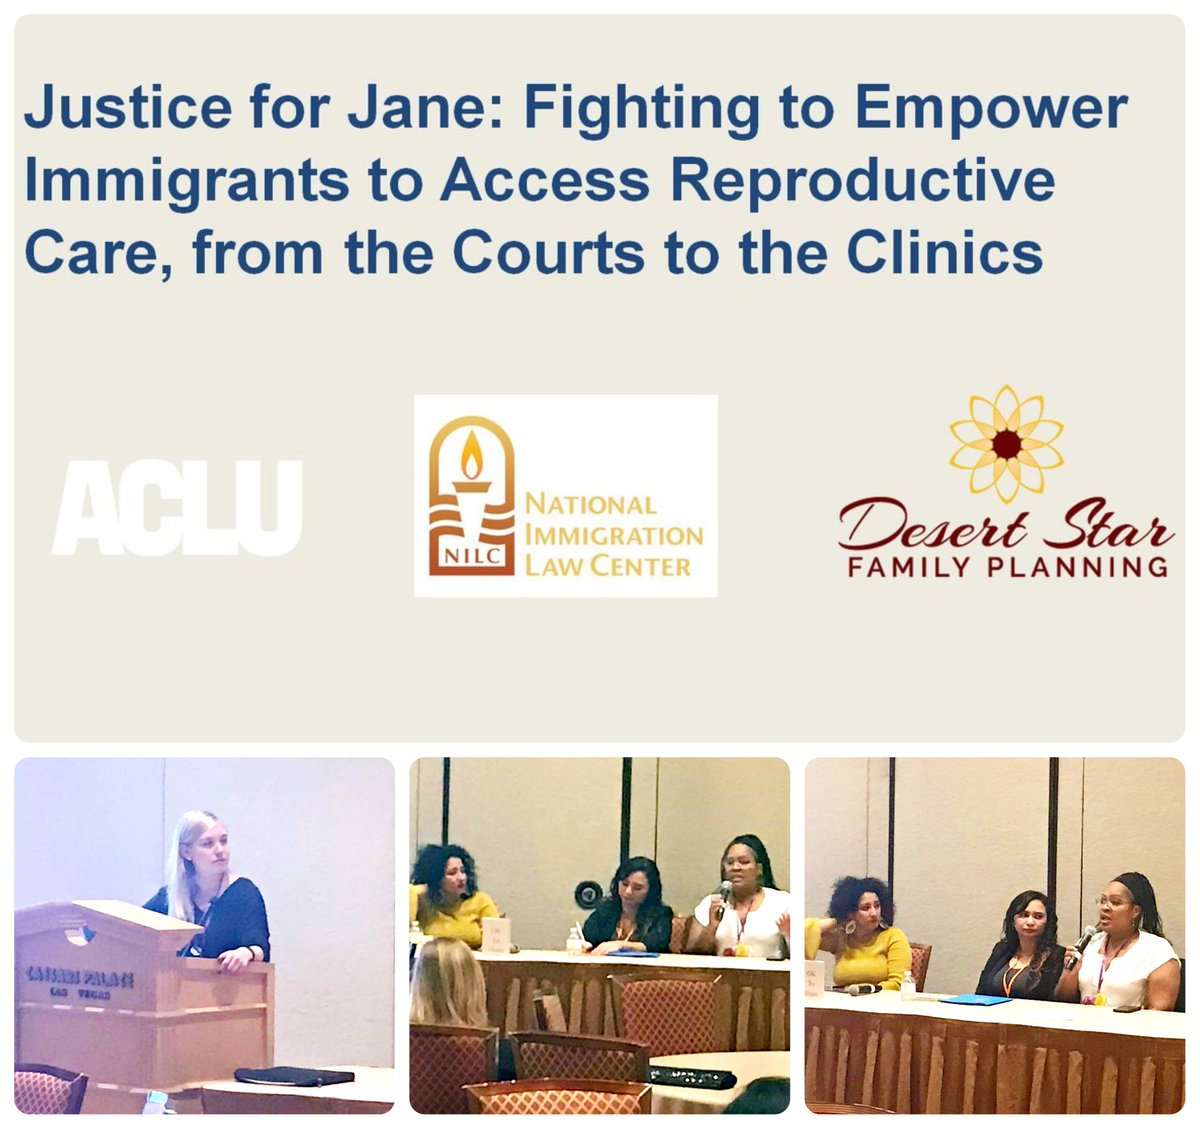 It was such a great honor to share space at the @AbortionCare Network annual meeting with amazing panelists: Meagan, attorney at @ACLU, Mayra, attorney at @NILC, and Alejandra Pablos @AleLaPlebe, activist. 
#keepalefree #AbolishICE #reproductiverightsarehumanrights